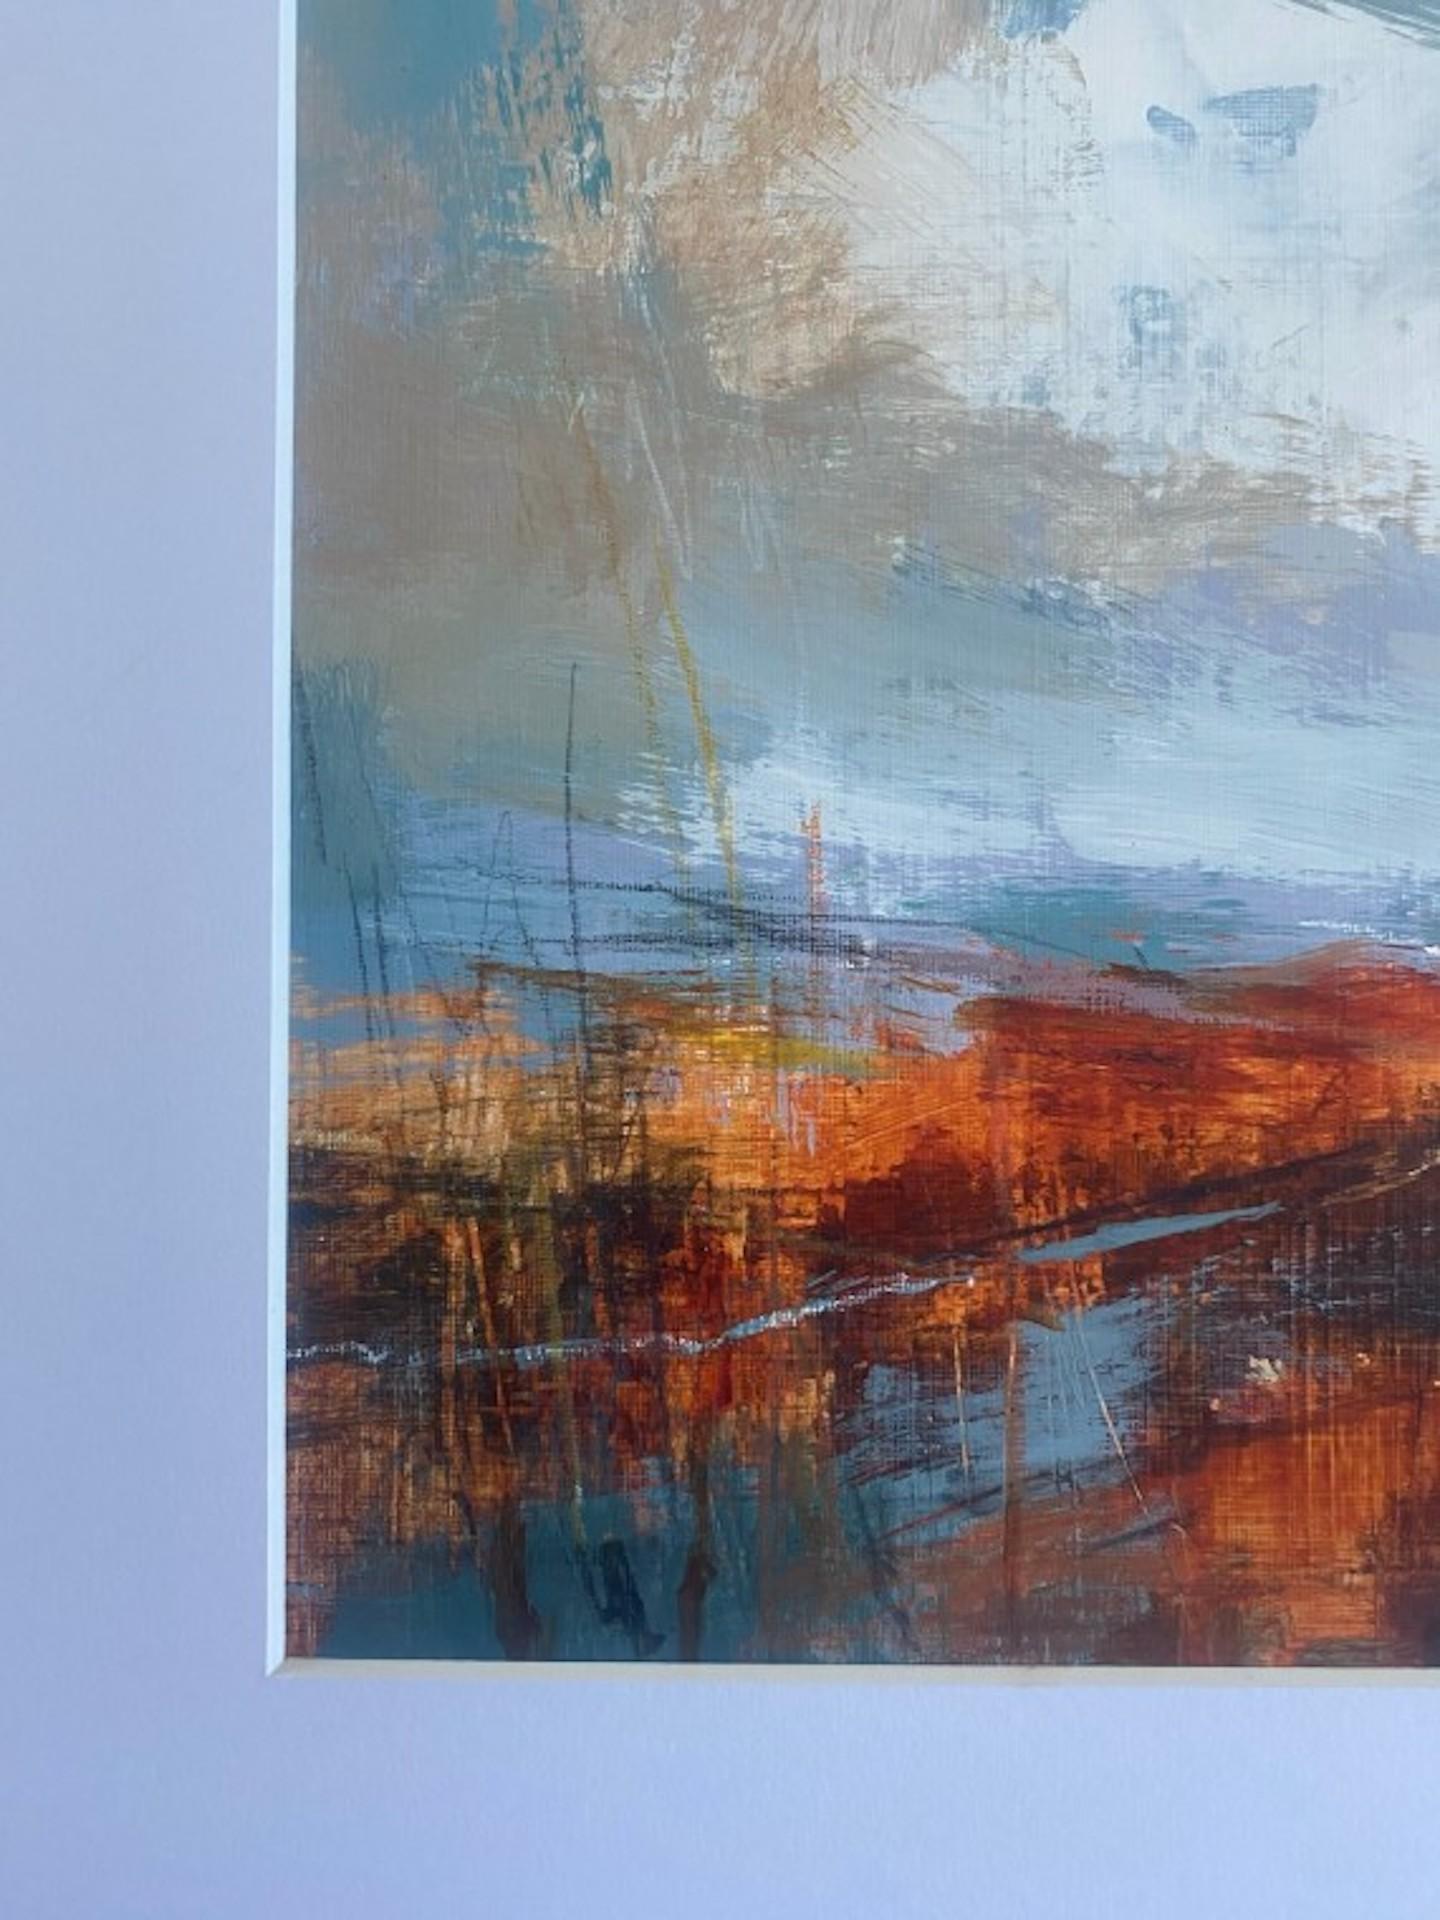 Autumn Moor Study by Luisa Holden [2021]
Original
Mixed Media on Acrylic Paper
Image size: H:27 cm x W:27 cm
Complete Size of Unframed Work: H:40.5 cm x W:40.5 cm x D:0.5cm
Sold Unframed
Please note that insitu images are purely an indication of how